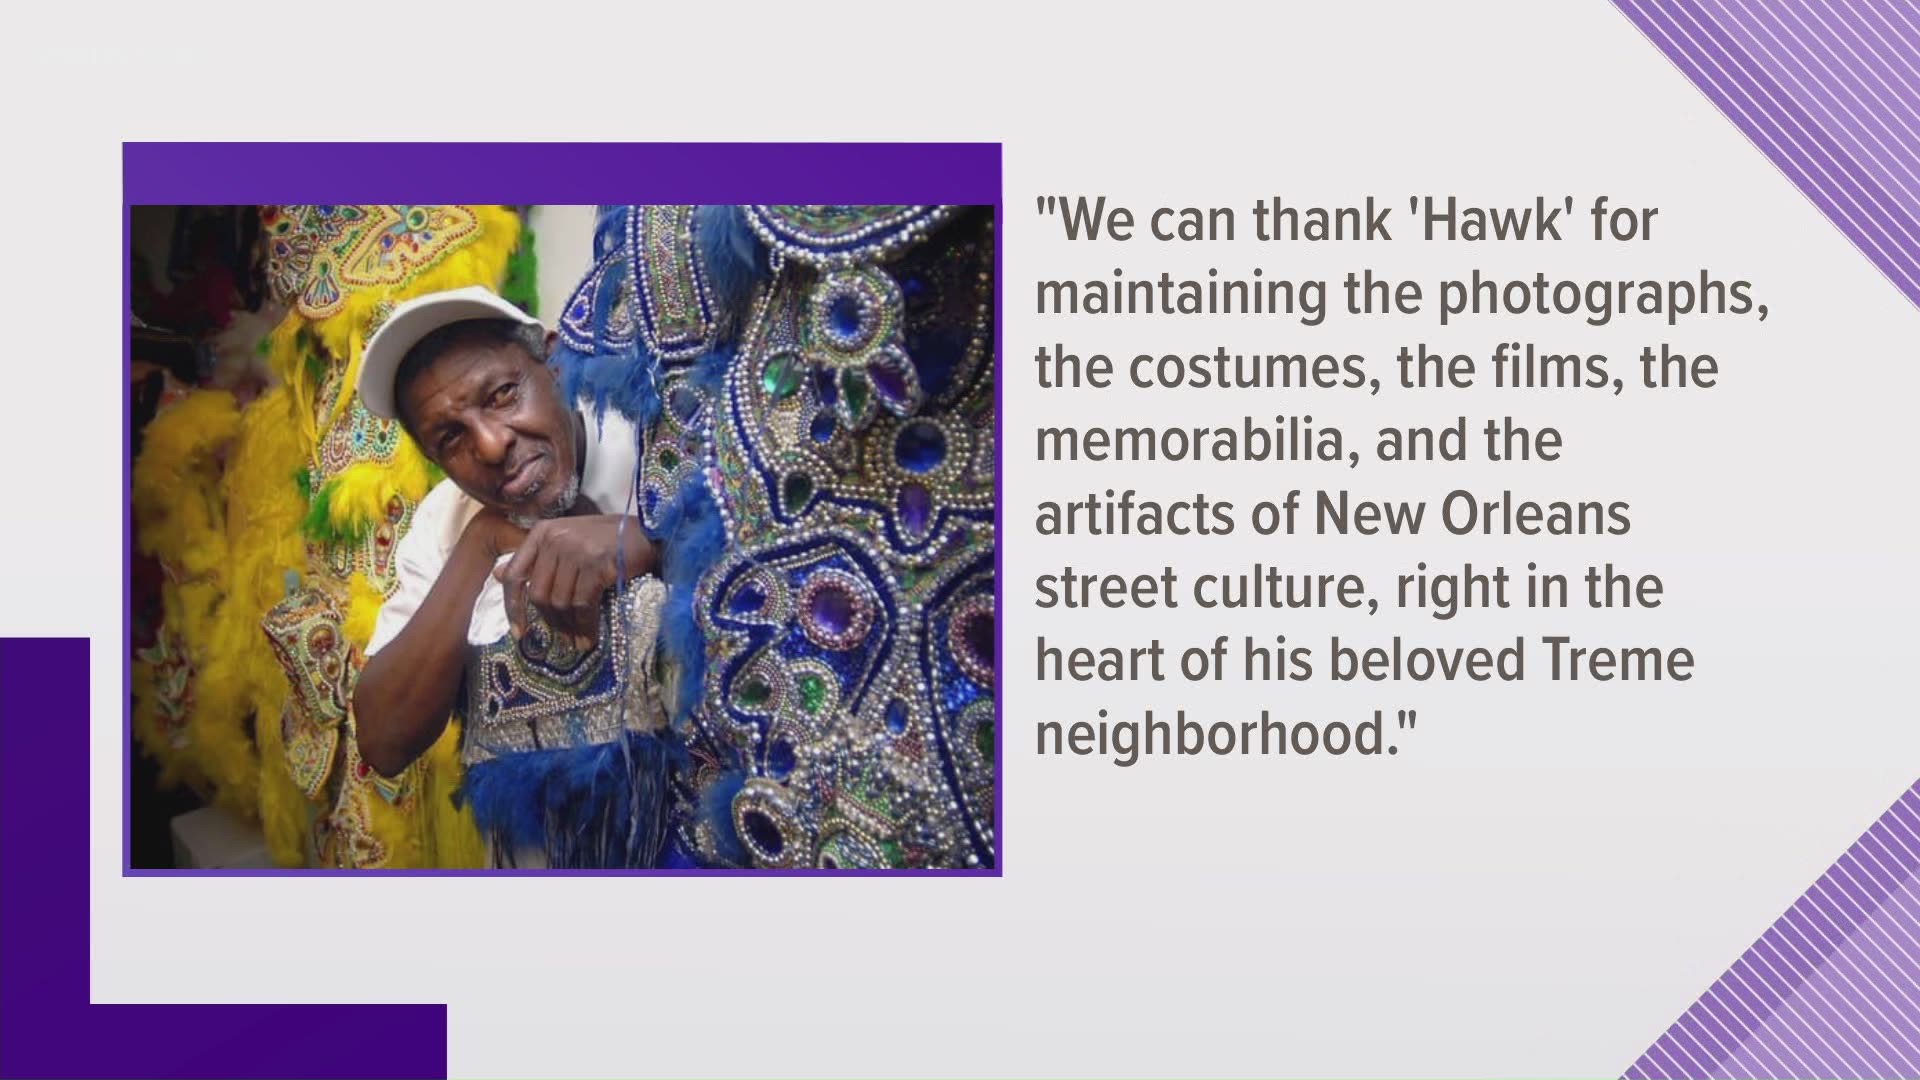 Remembering Sylvester 'Hawk' Francis as a cultural preservationist